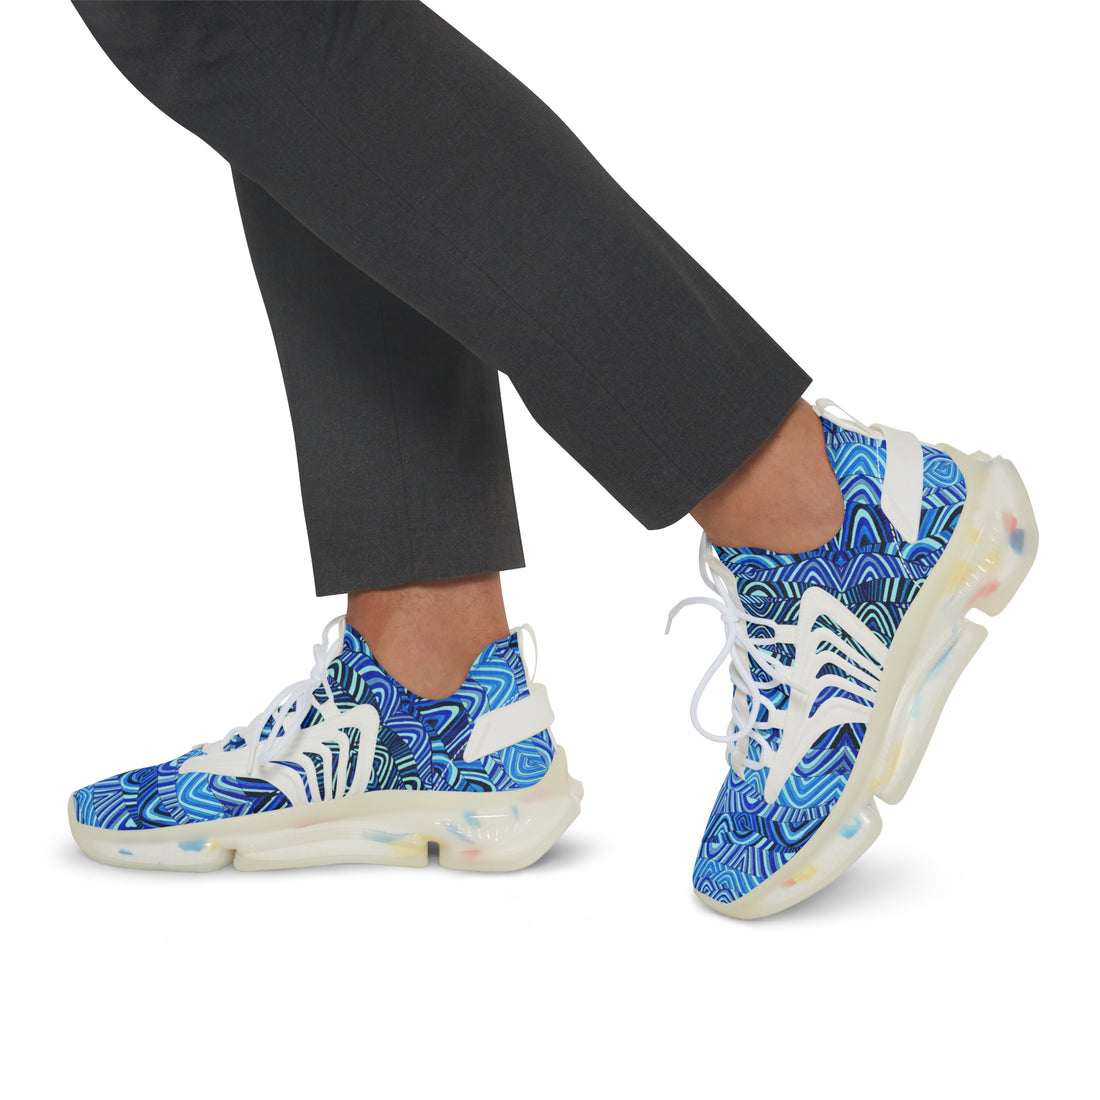 icy blue sonic waves print mesh knit sneakers